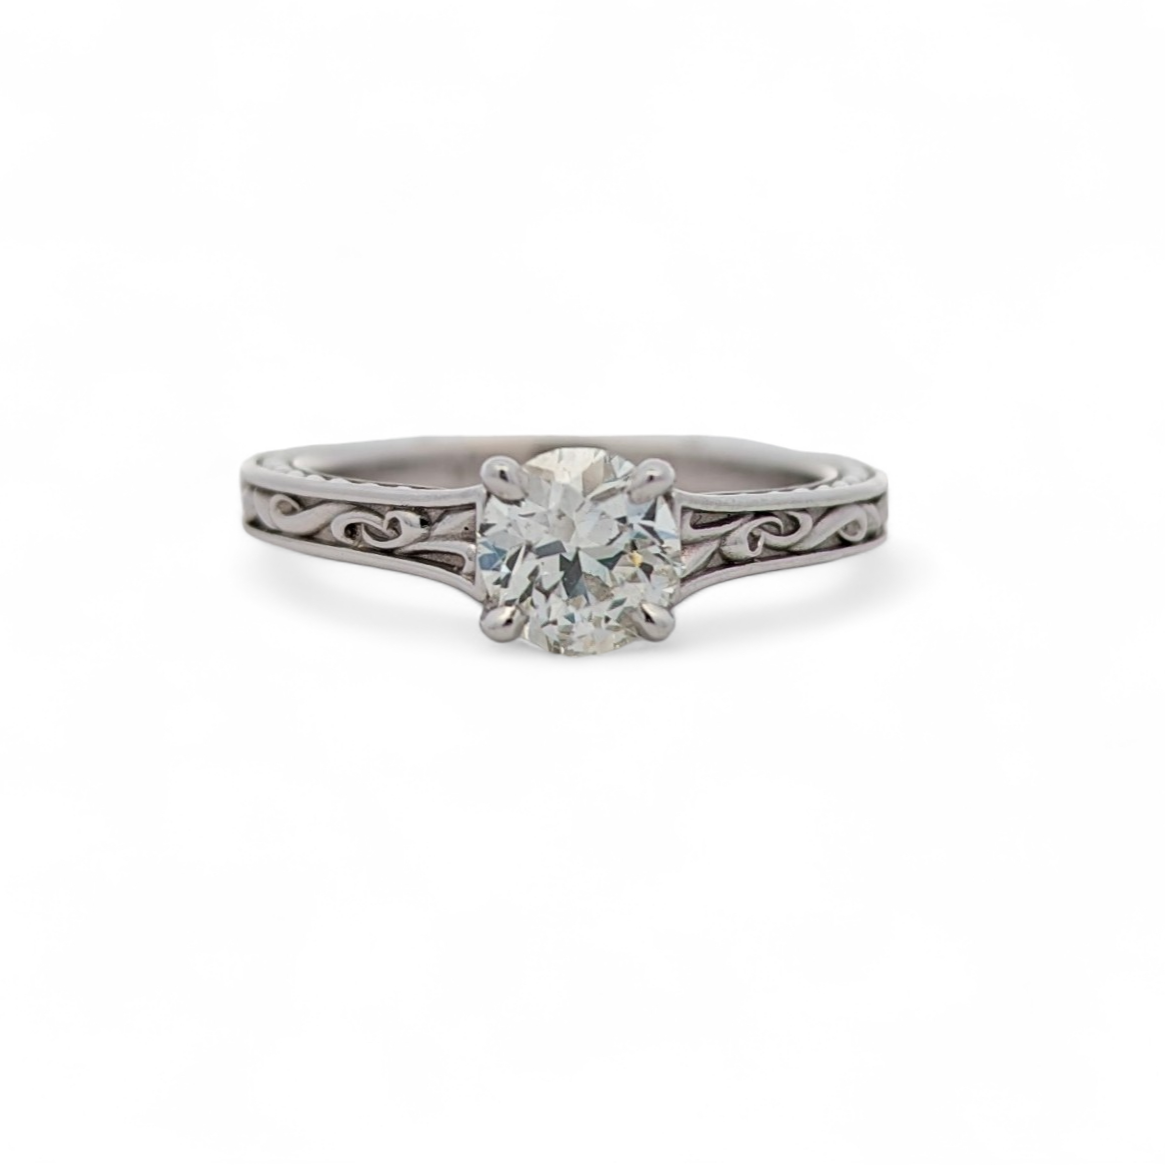 Vintage Inspired 14K White Gold Engagement Ring with 0.80 Carat Natural Diamond